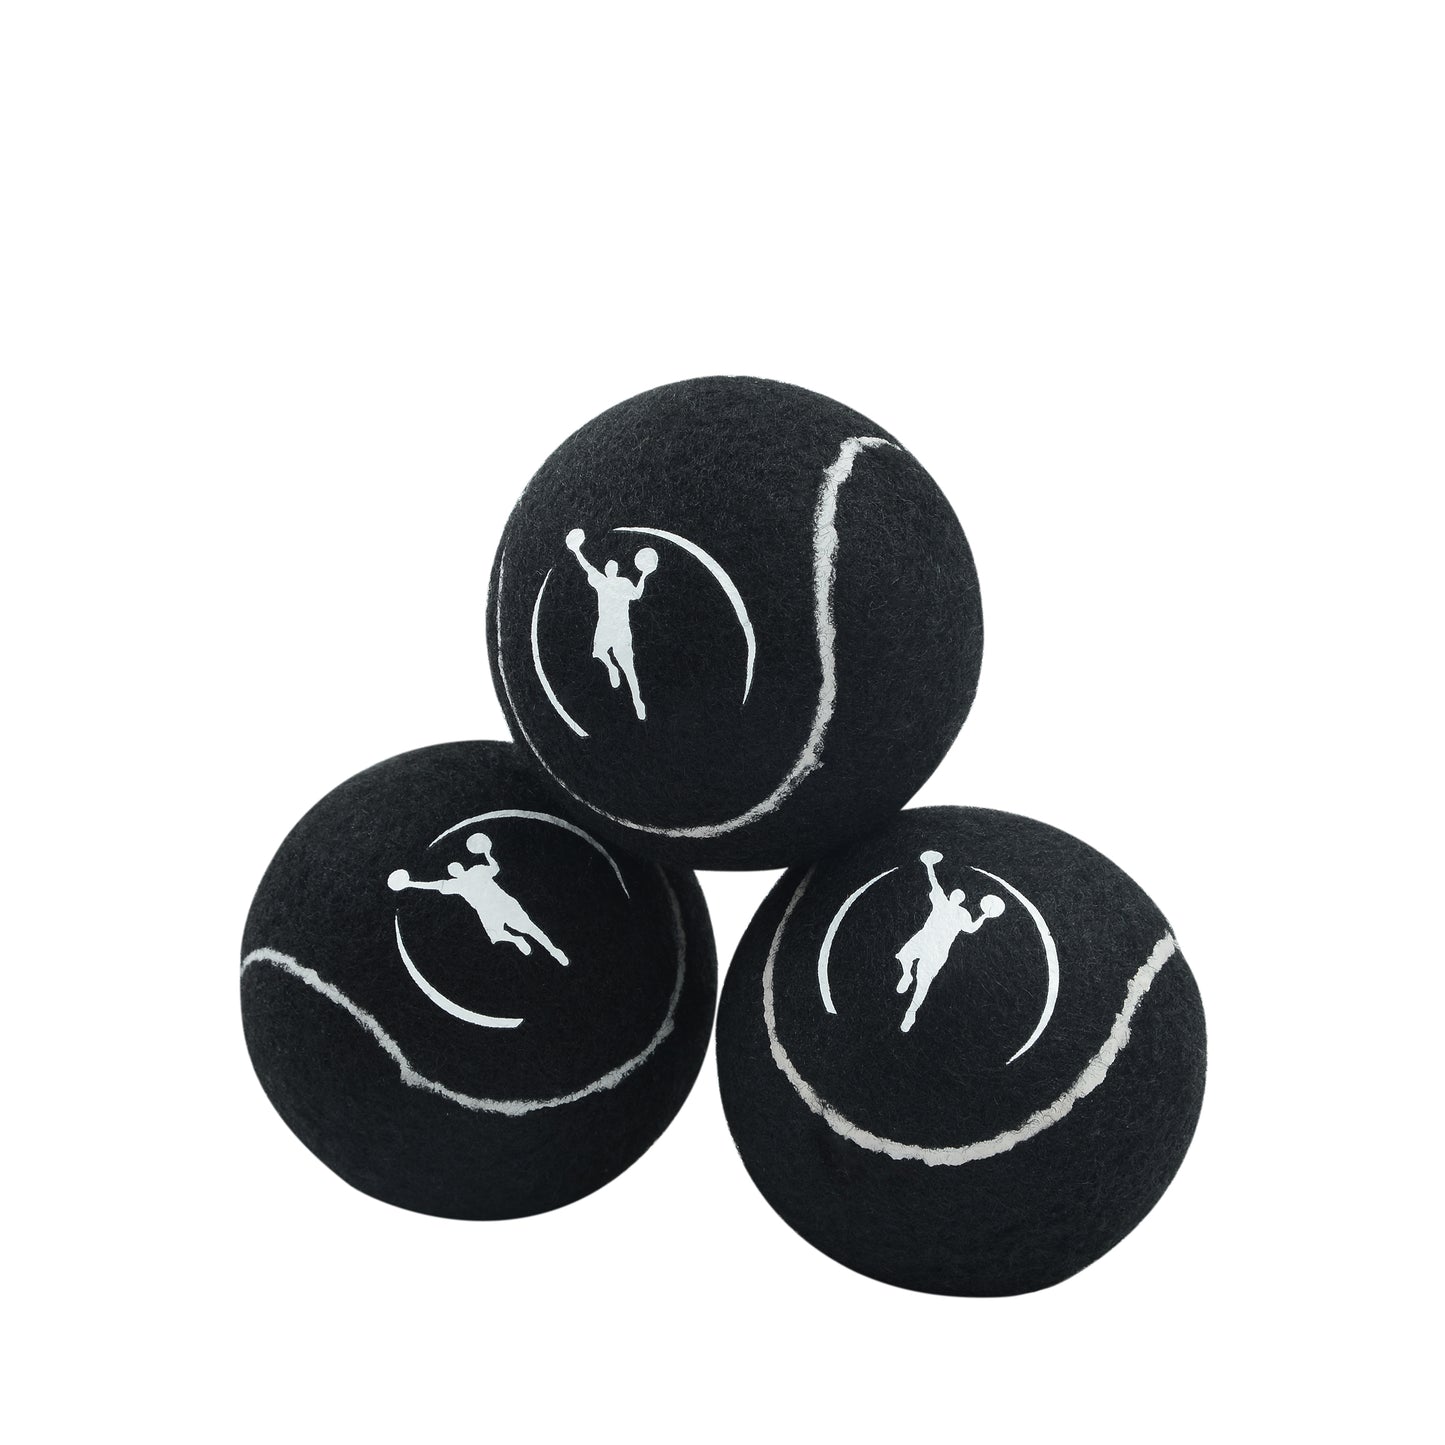 Weighted Tennis Ball (Three Pack)